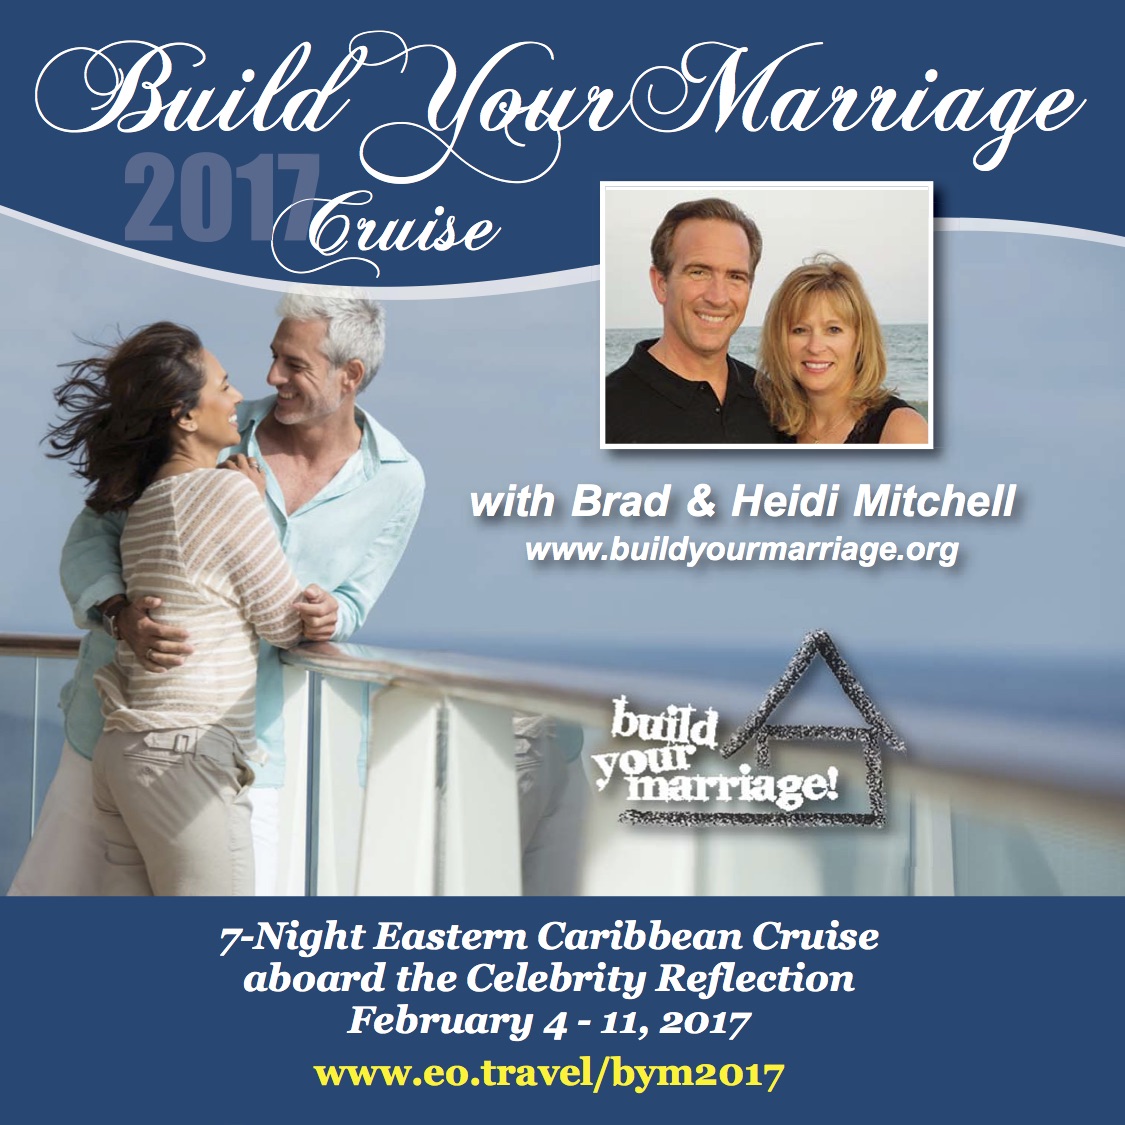 Sail the romantic seas and Build Your Marriage!